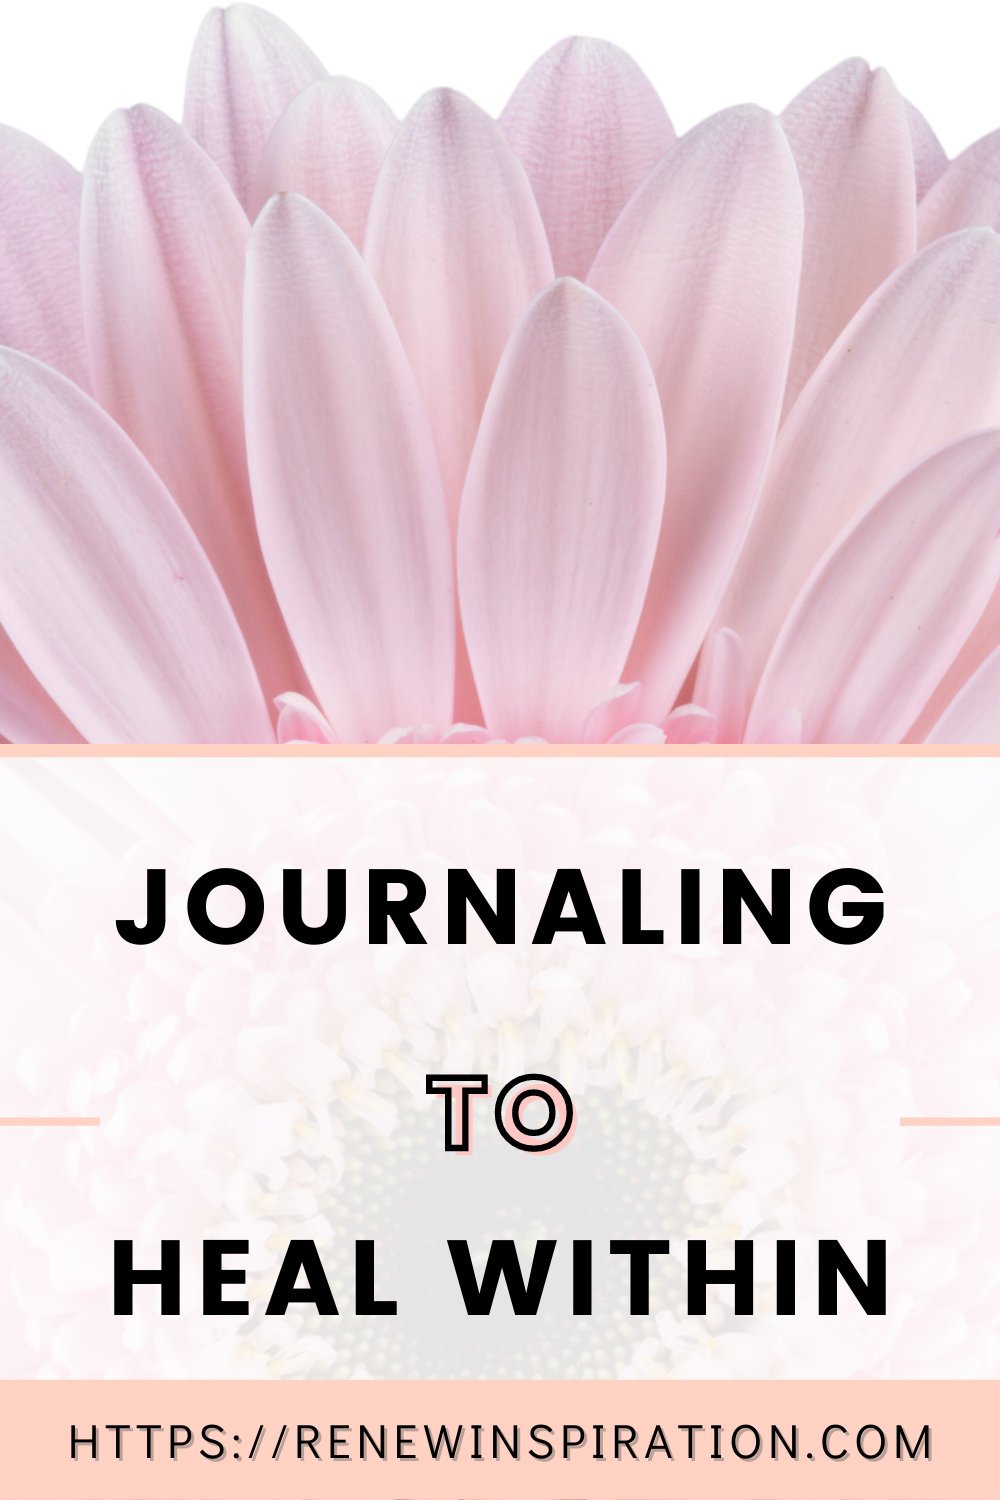 Renew Inspiration, Journaling to Heal Within